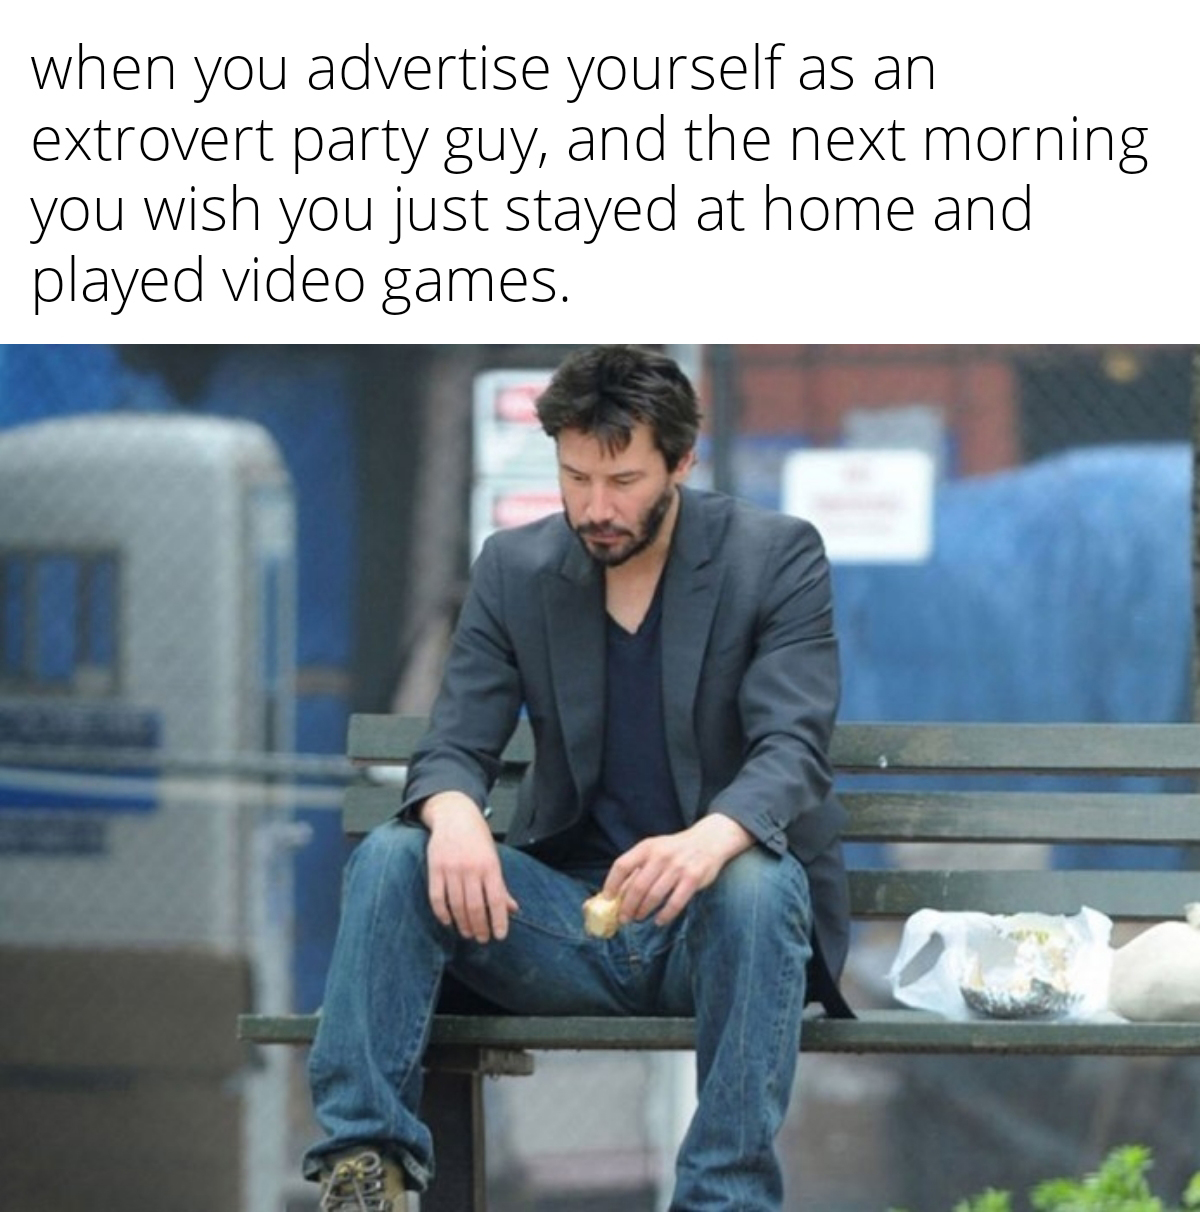 dank memes - sad keanu reeves meme - when you advertise yourself as an extrovert party guy, and the next morning you wish you just stayed at home and played video games.